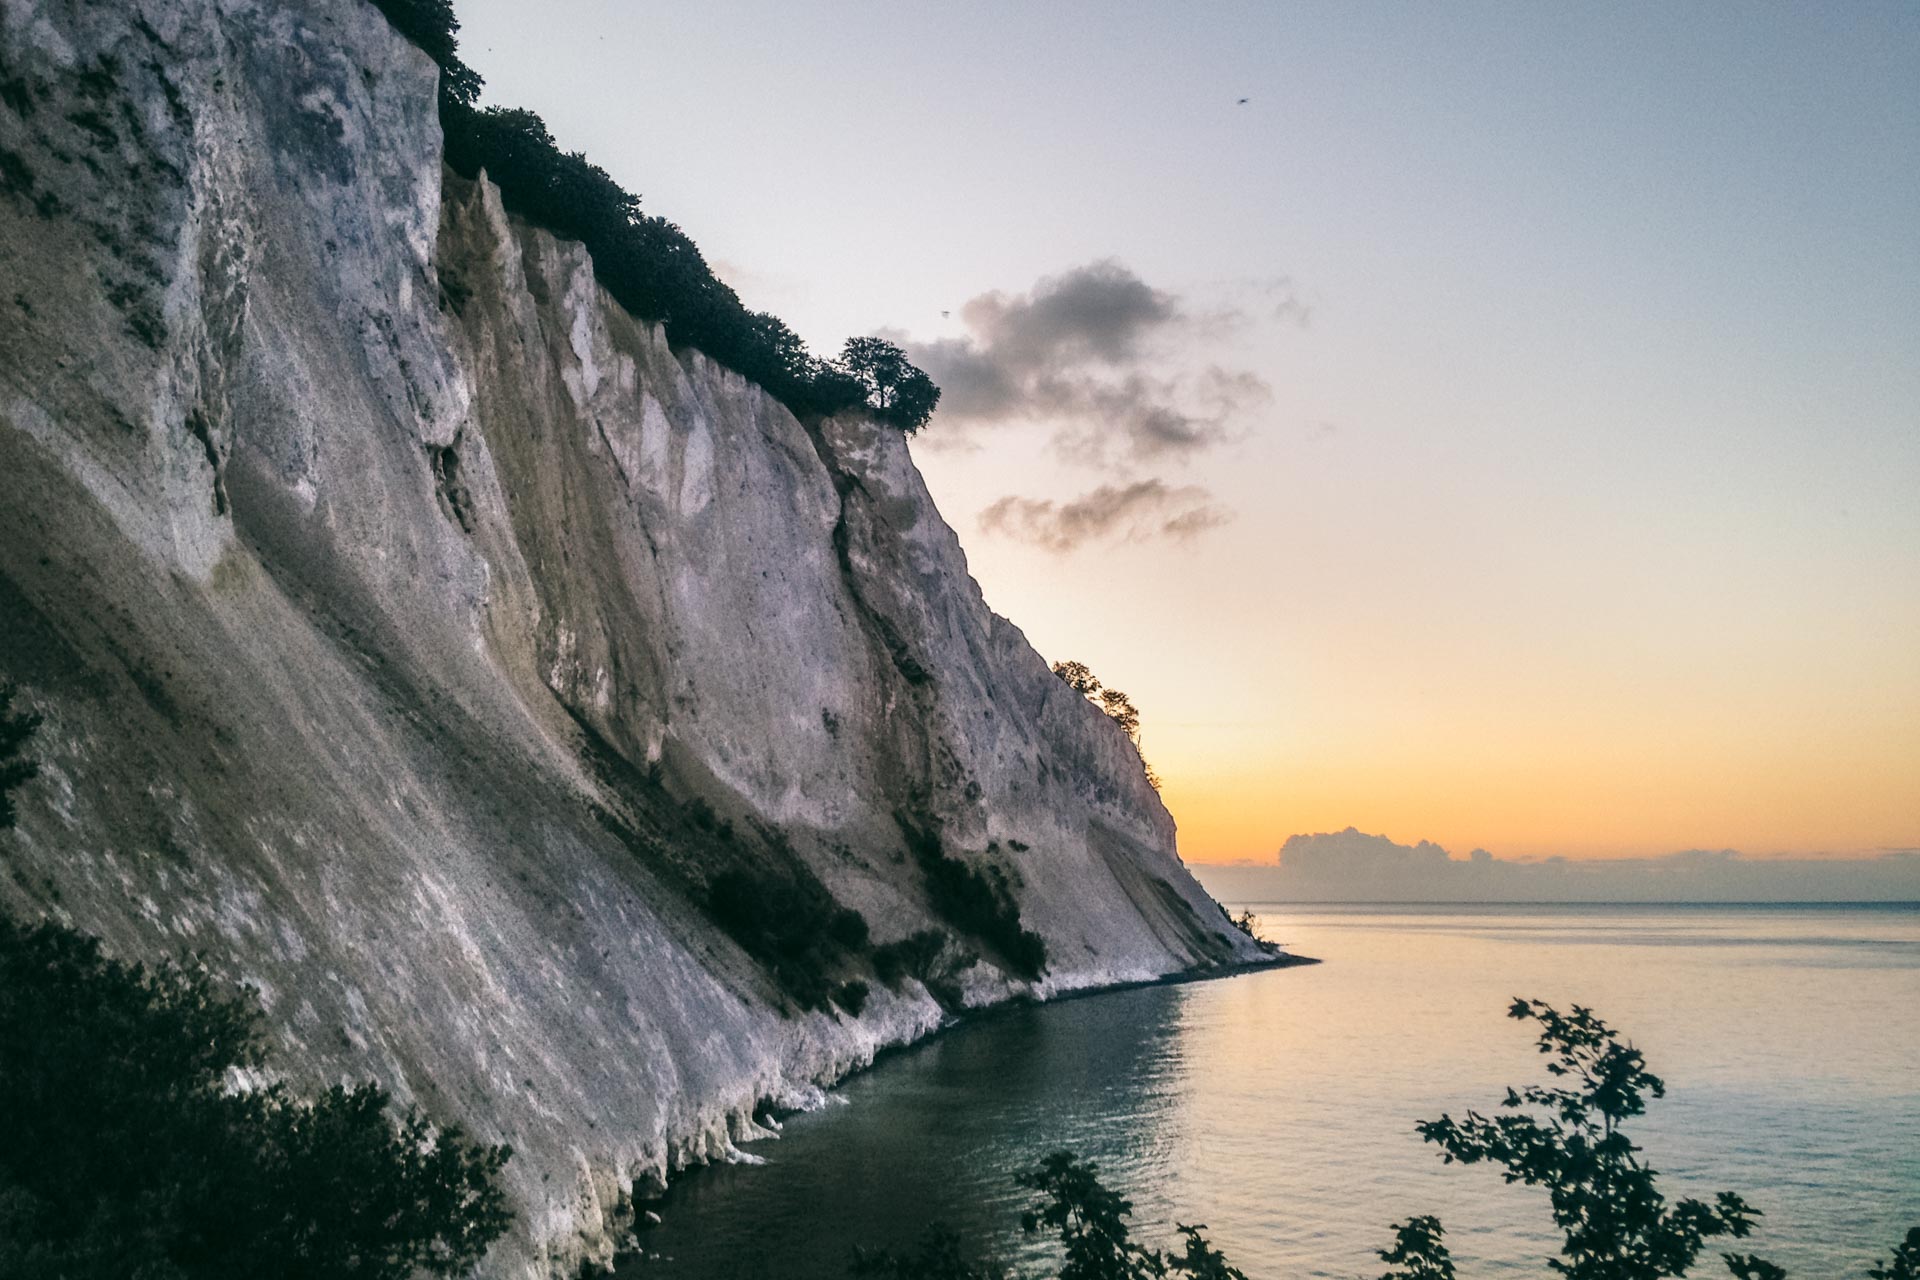 Travel Guide to Møn: 11 Best Things to Do & See Near Møns Klint